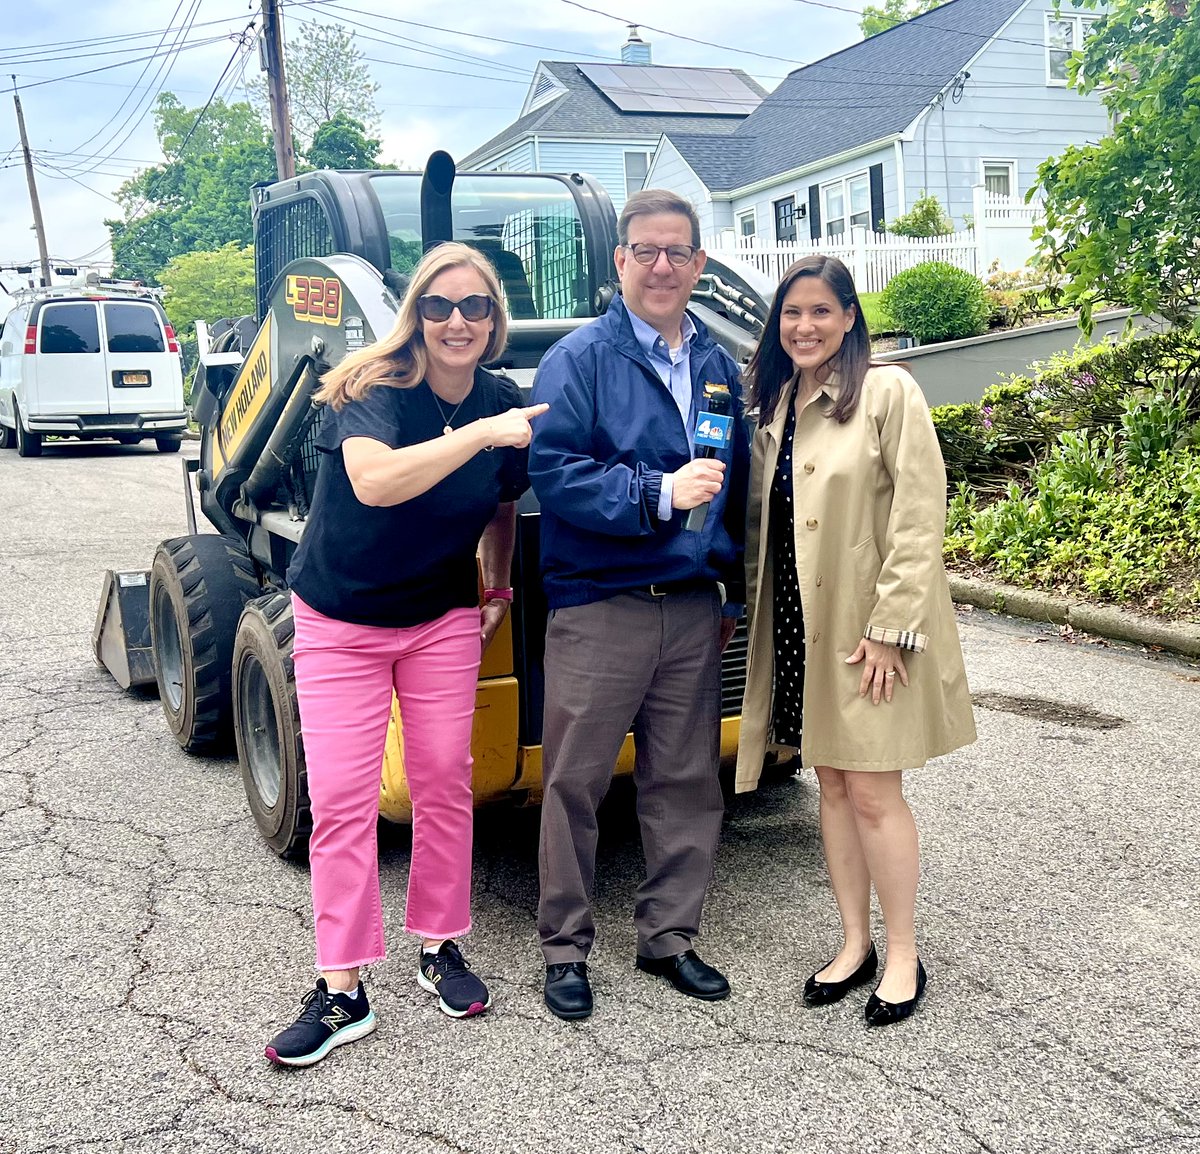 I just interviewed with Lynda Baquero from NBC News about best practices for hiring a Home Improvement Contractor - Linda & Nicole were very nice! It airs on NBC News on Thursday! @LyndaBaquero4NY